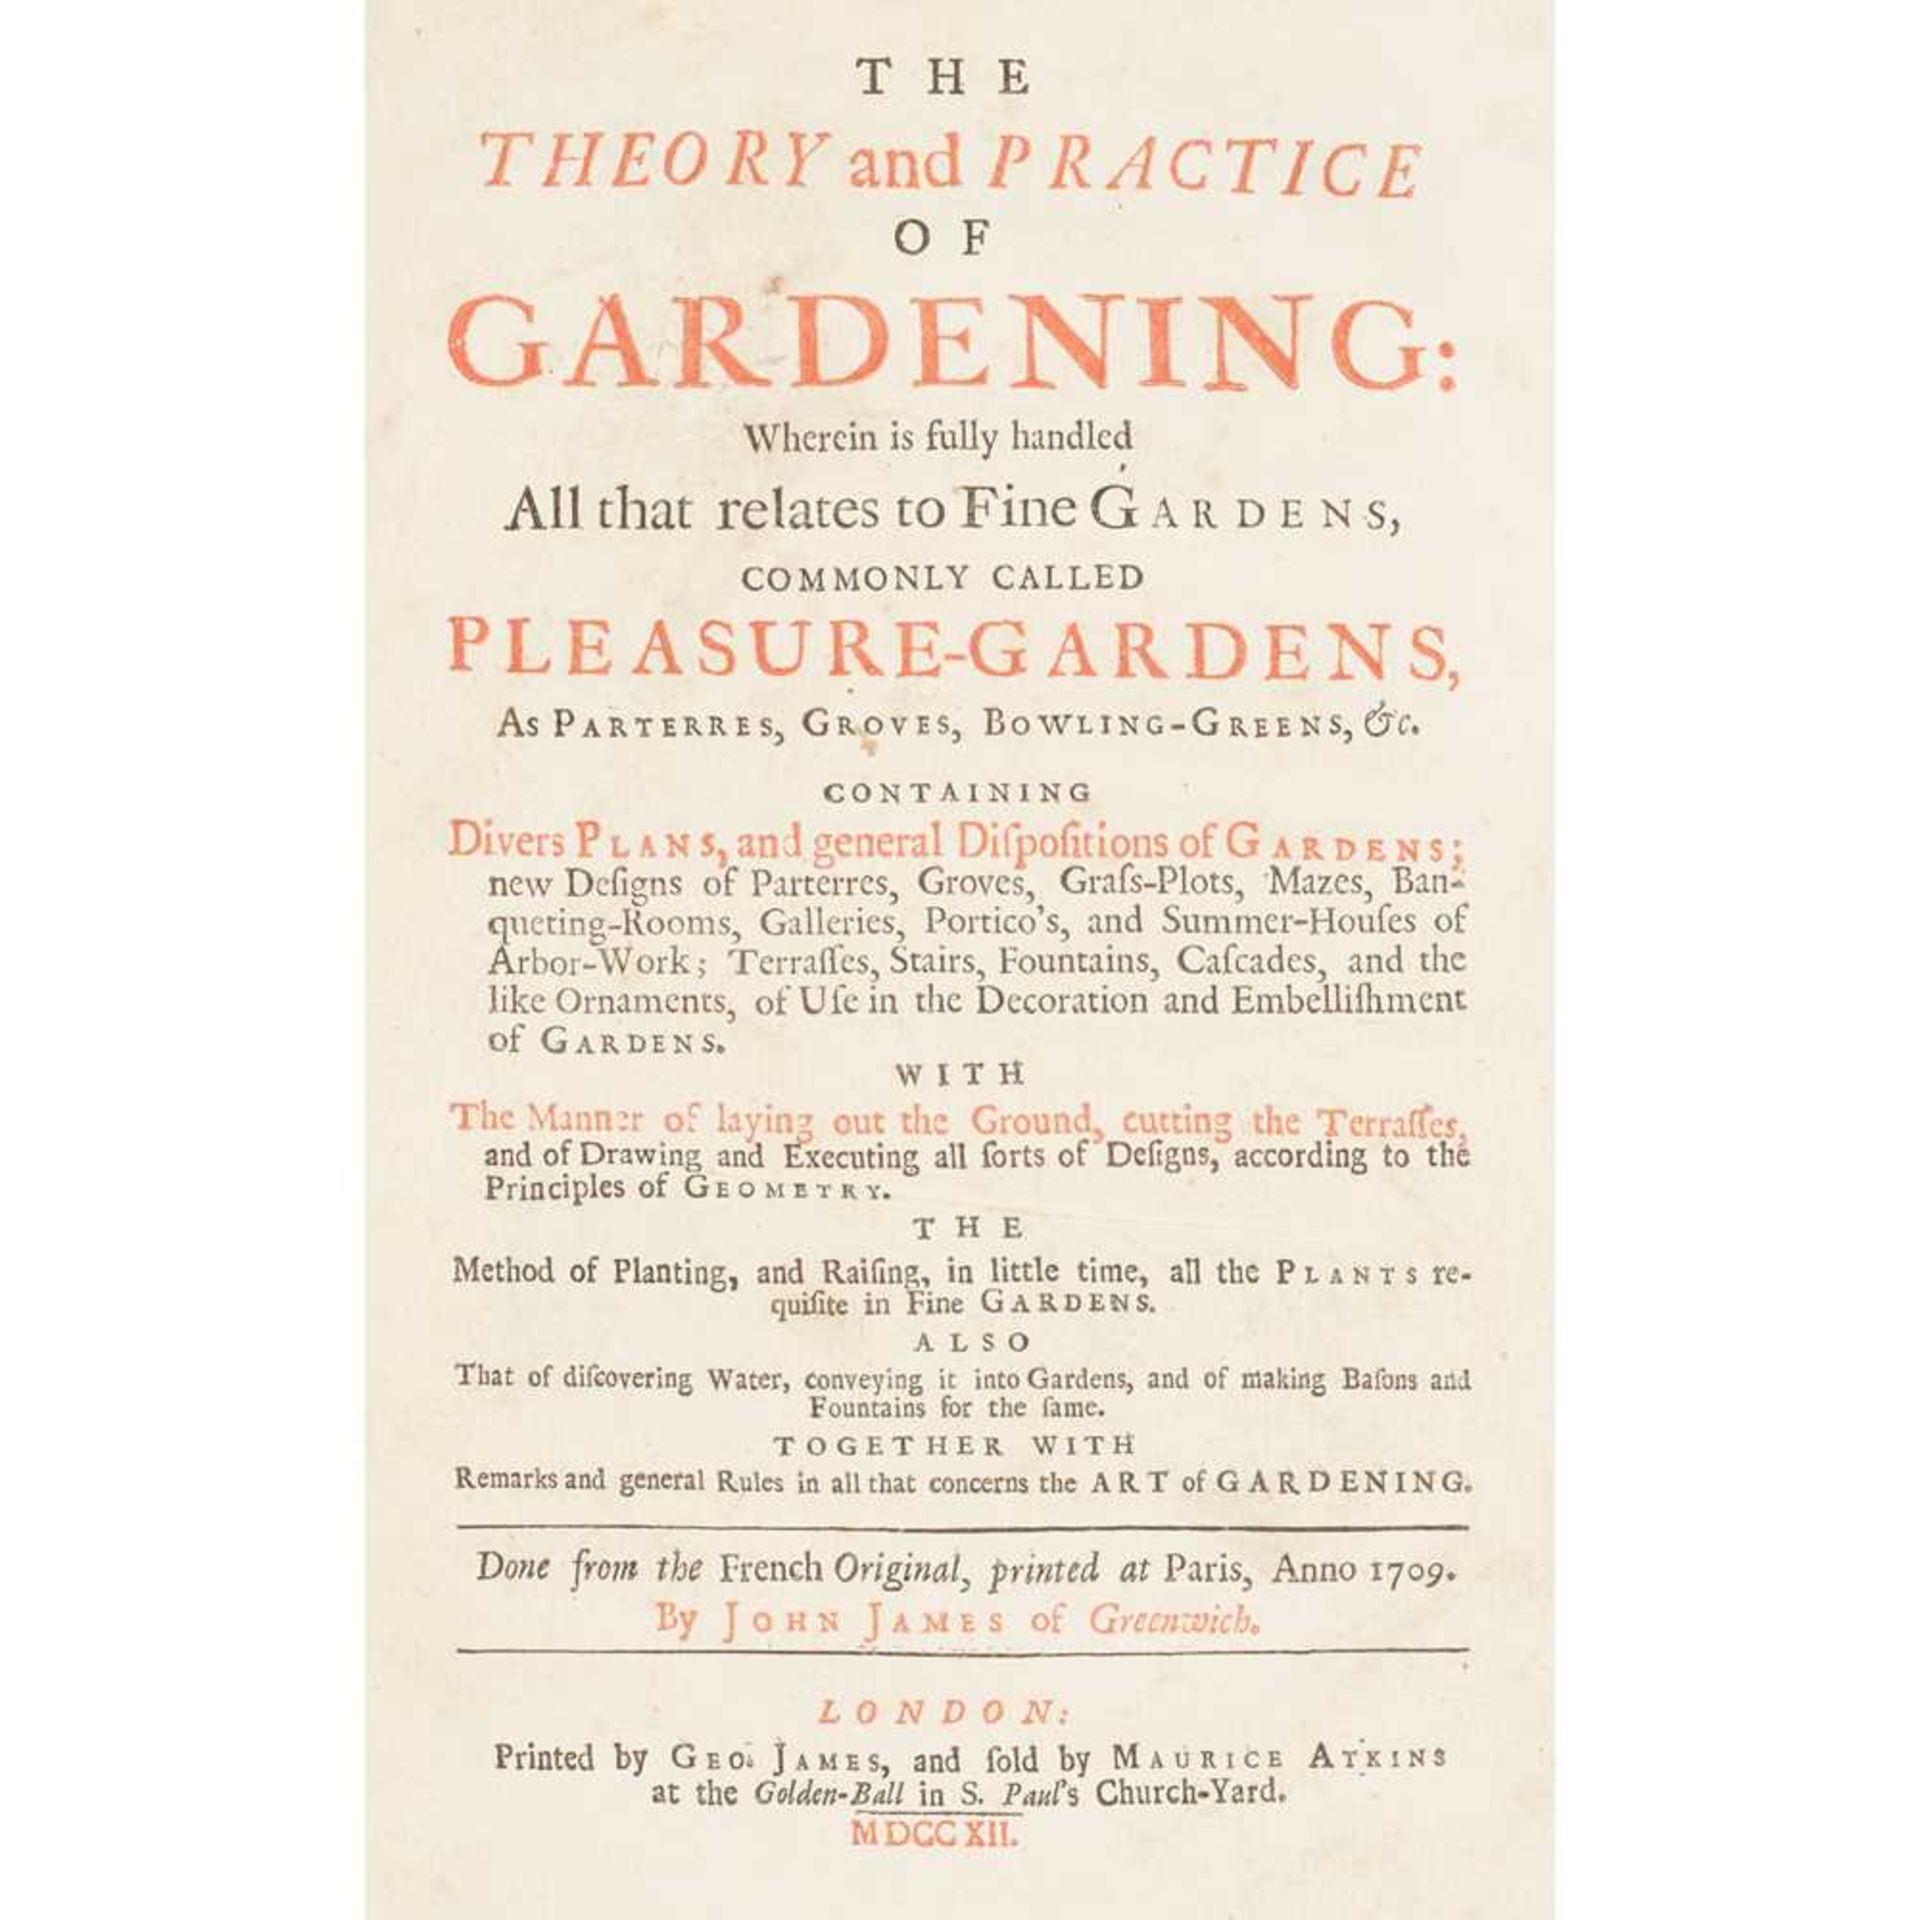 Dézallier d’Argenville, A.-J. - John James, translator The Theory and Practice of Gardening - Image 2 of 3